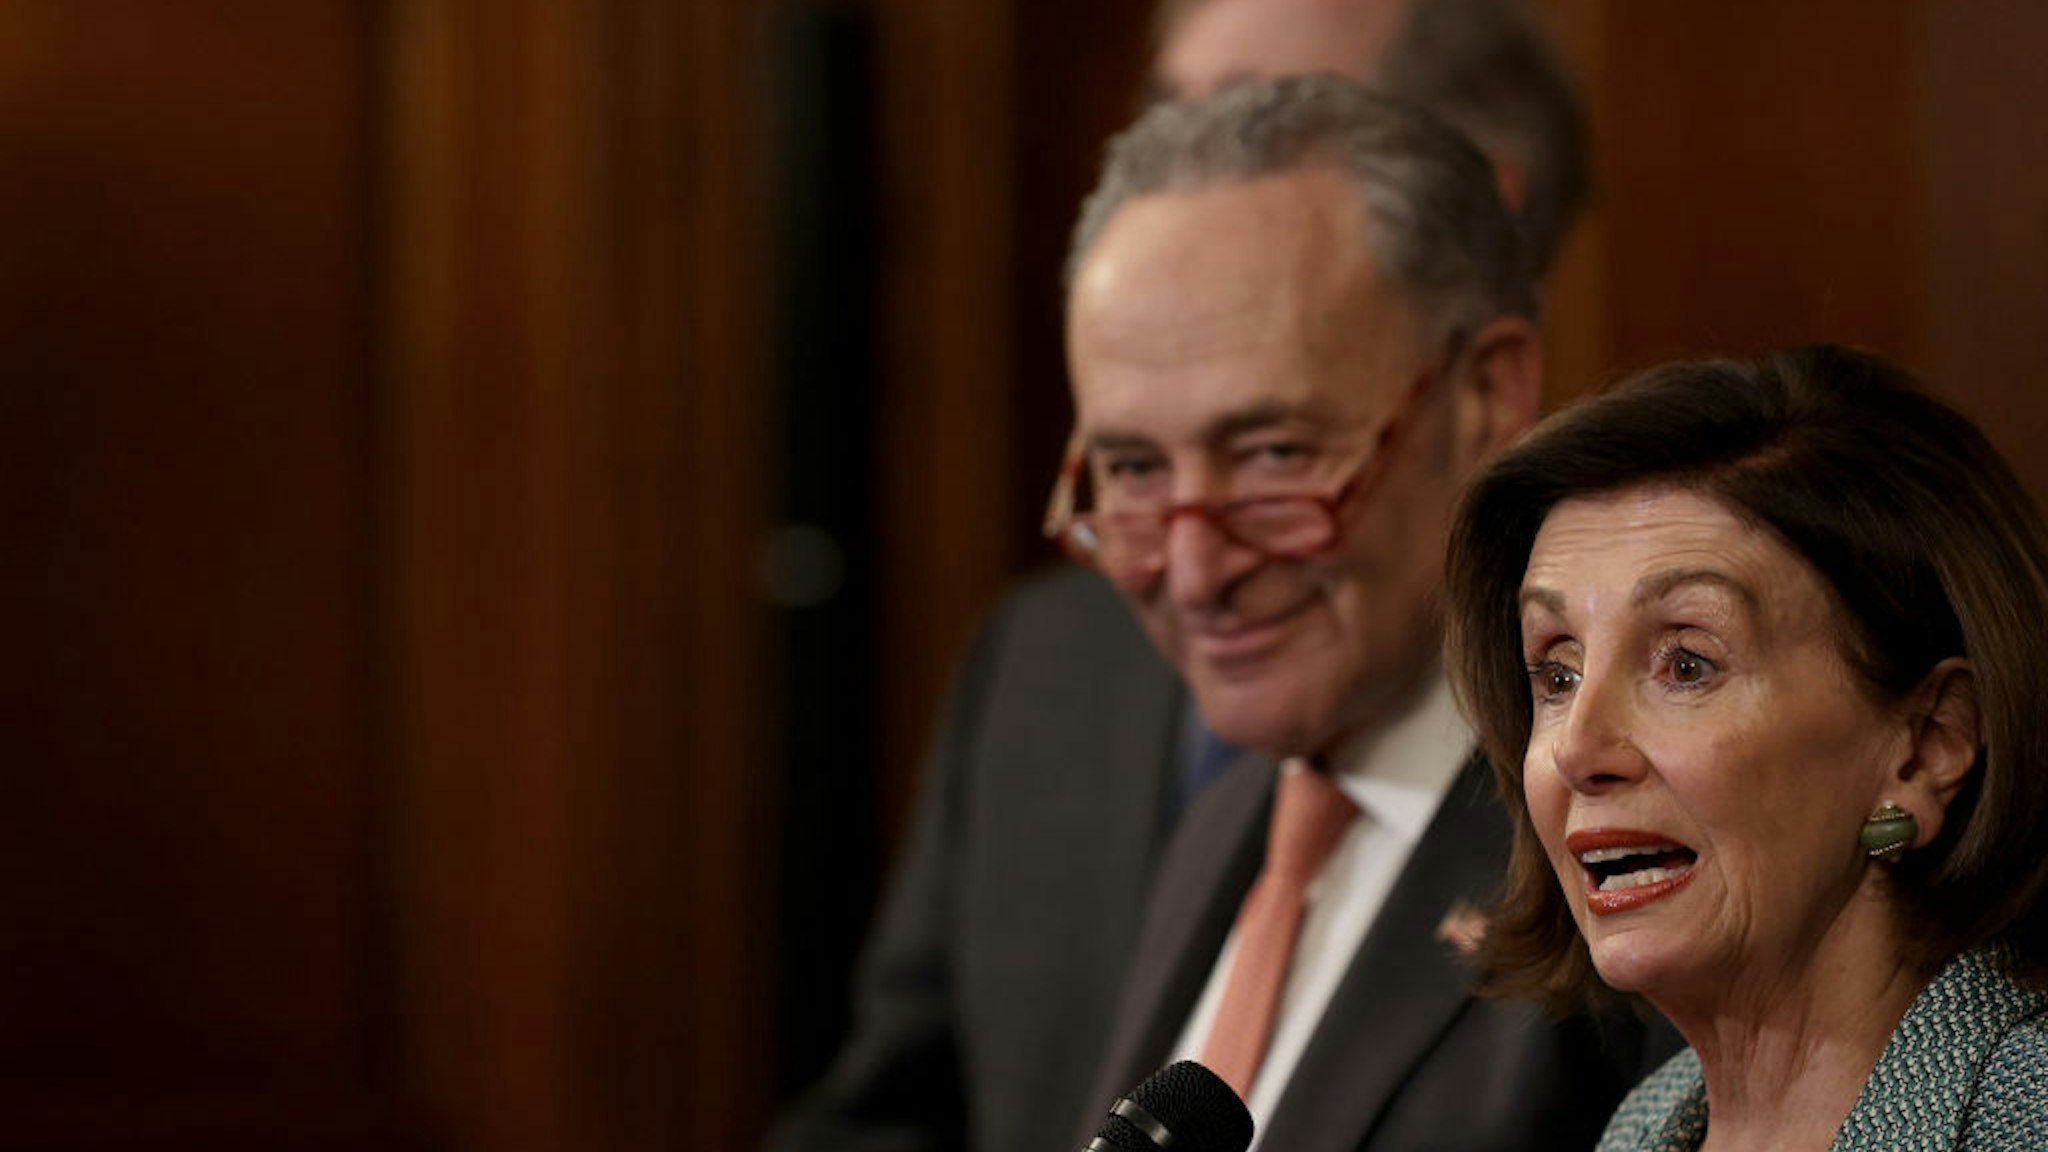 U.S. Speaker of the House Nancy Pelosi (R) (D-CA) and Senate Minority Leader Chuck Schumer (L) (D-NY) speak at a press conference marking the one year anniversary of the House passing HR-1, the For The People Act, March 10, 2020 in Washington, DC